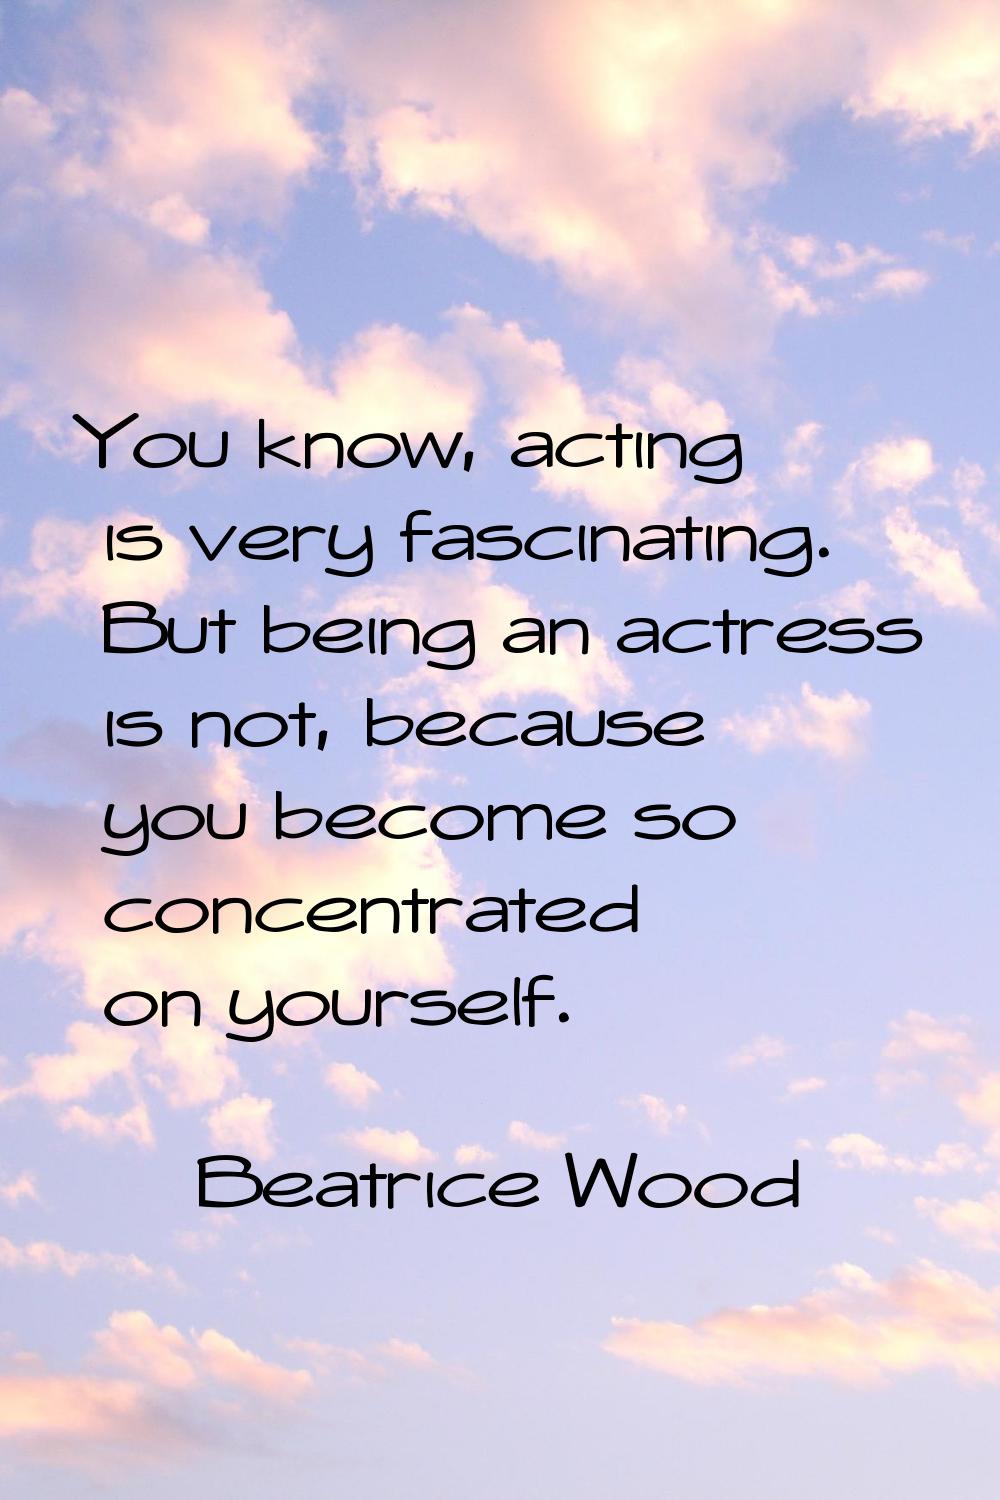 You know, acting is very fascinating. But being an actress is not, because you become so concentrat